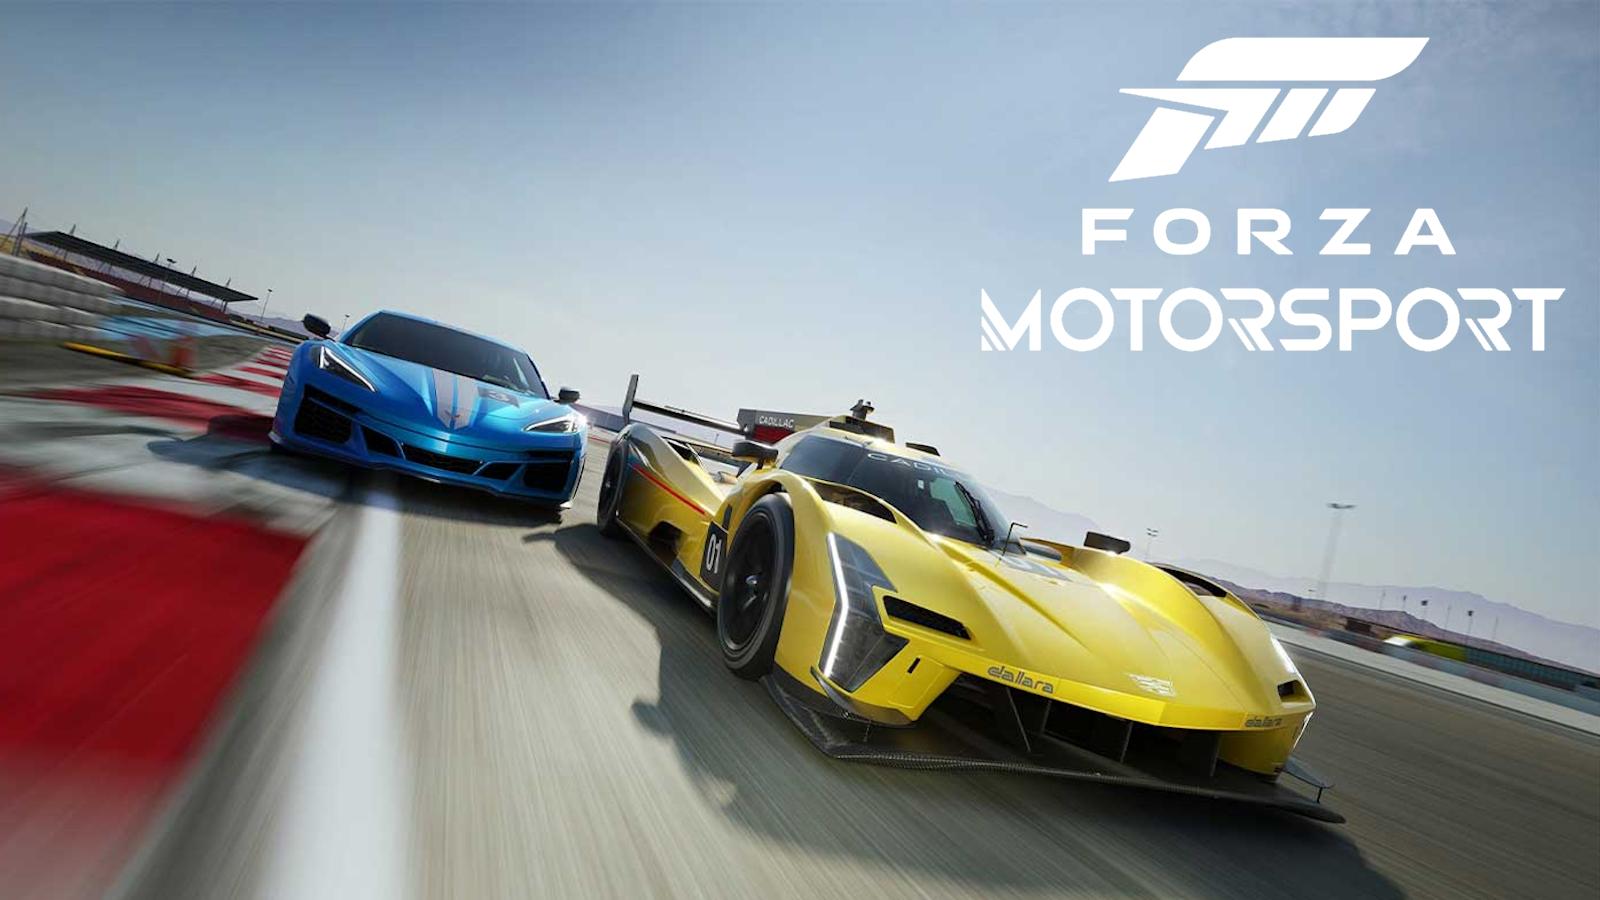 Where was Forza Motorsport 8 at the Xbox E3 2019 Briefing?